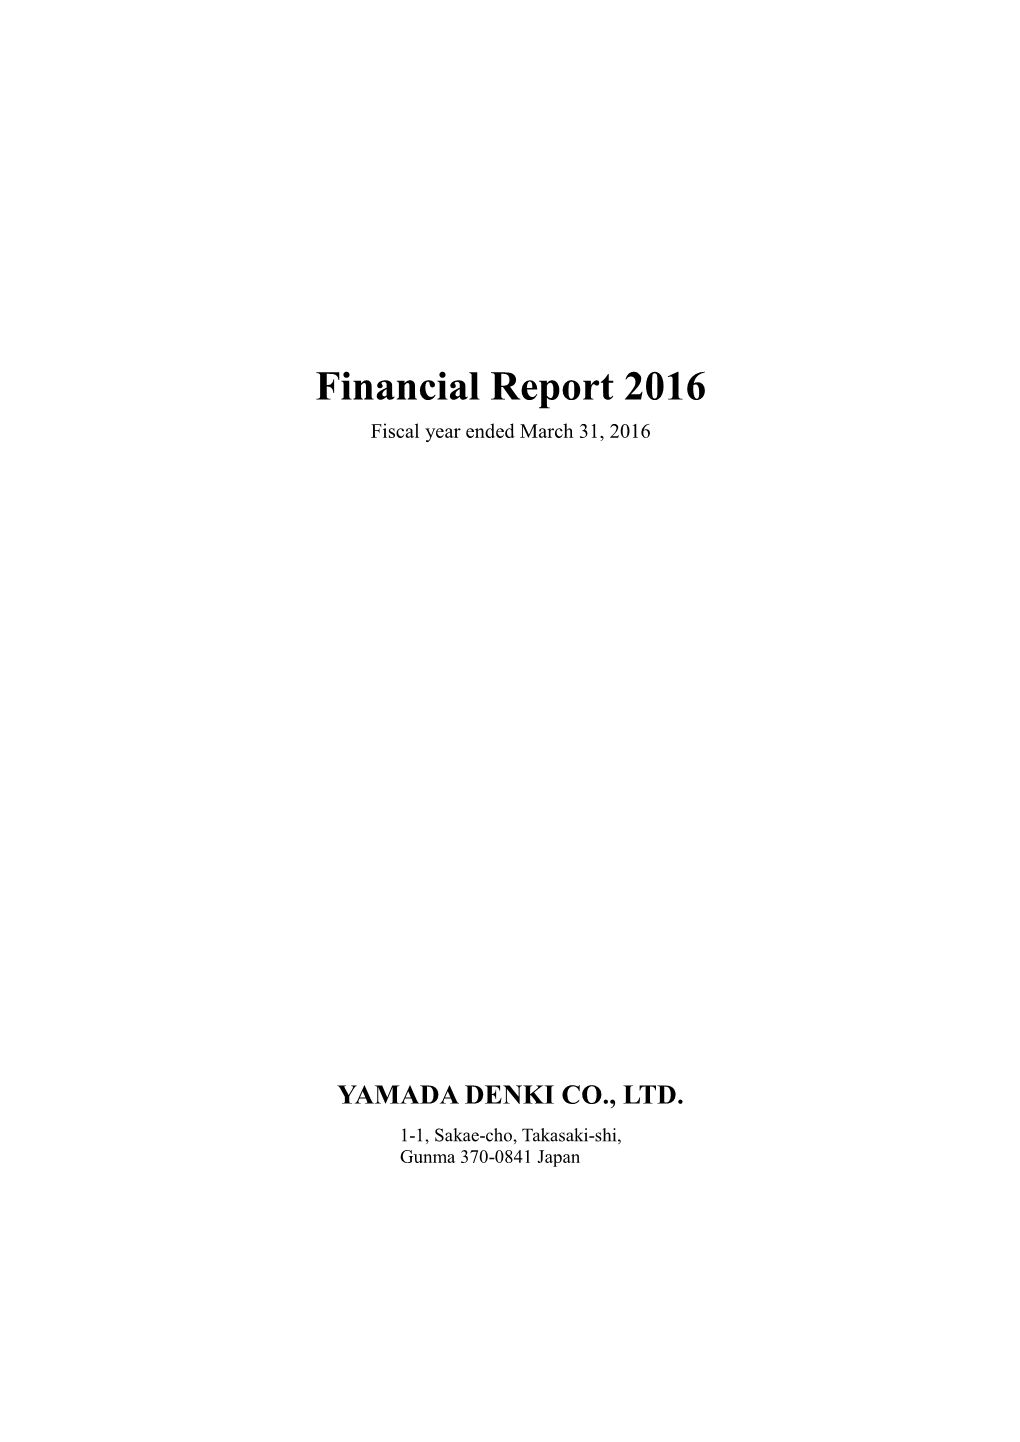 Financial Report 2016 Fiscal Year Ended March 31, 2016